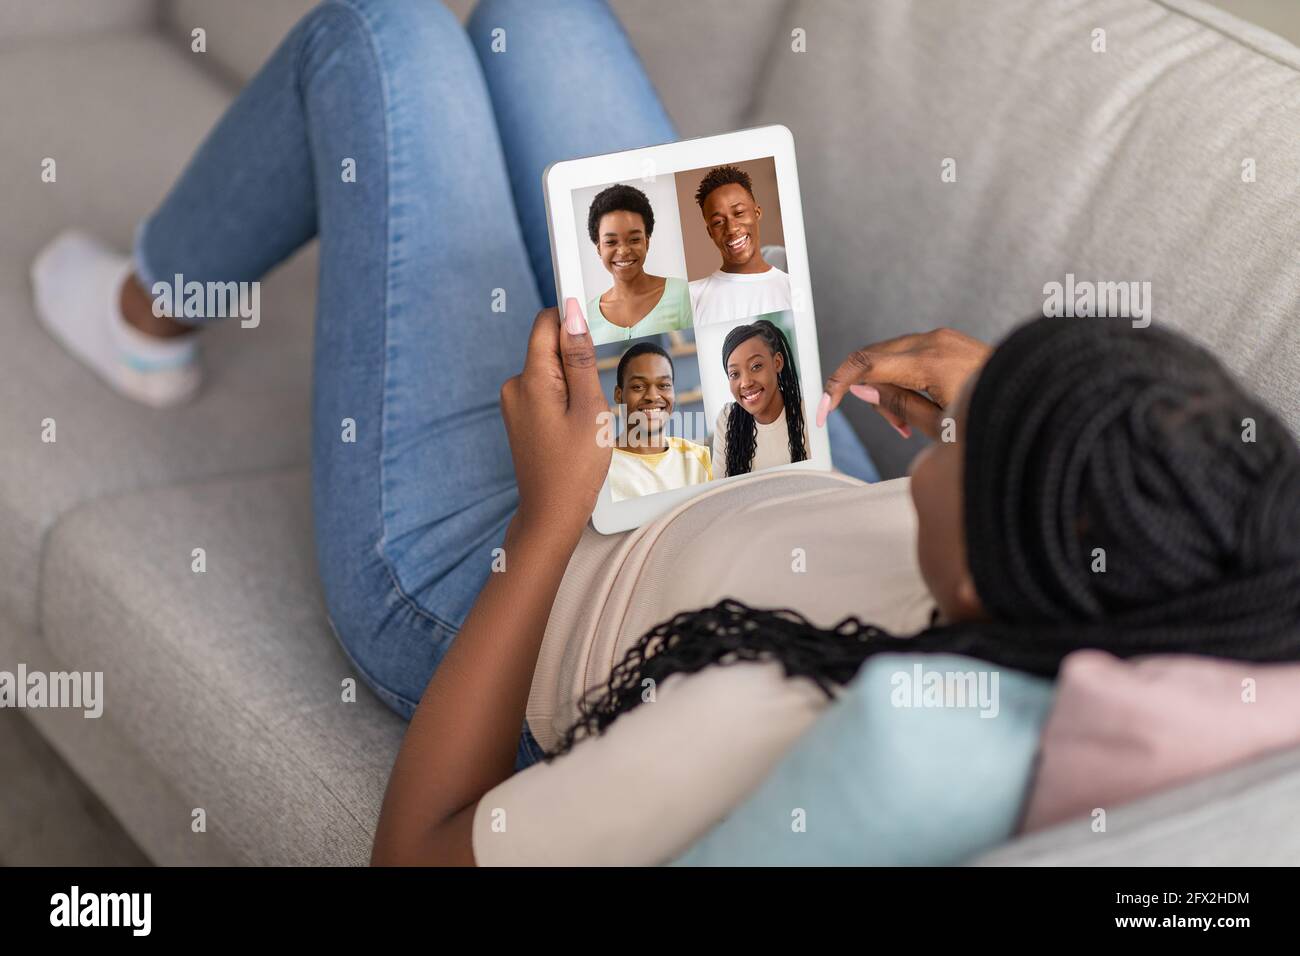 Covid-19, self-isolation, weekend and online chat with family remote Stock Photo